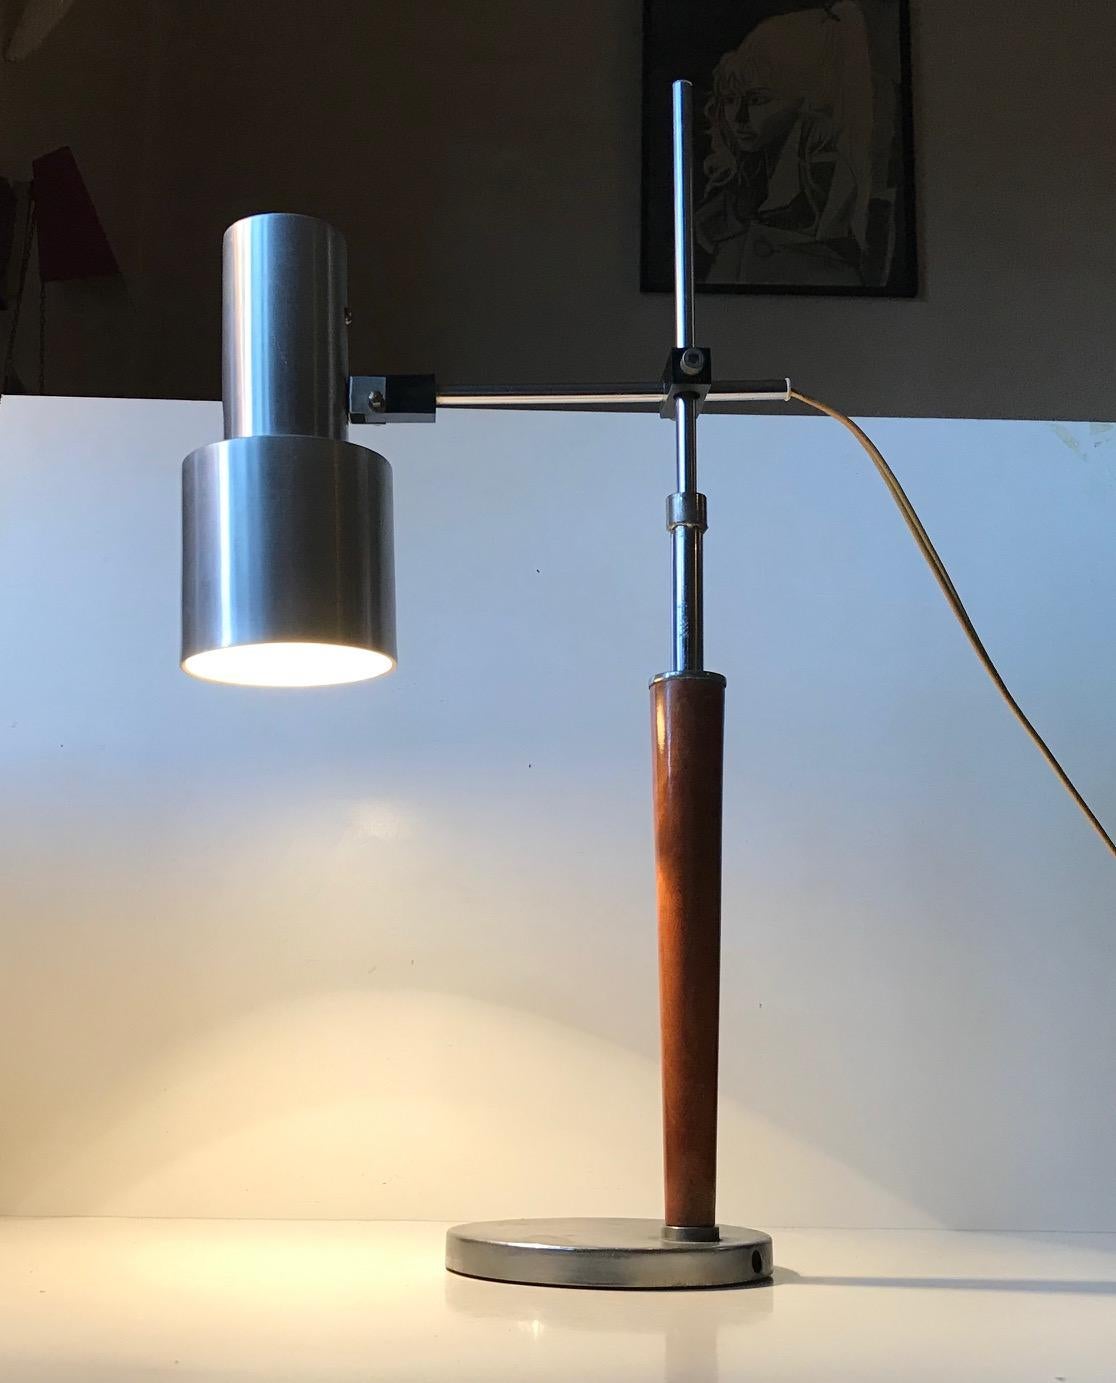 Fully adjustable table lamp with a mallet shaped shade in brushed aluminium, base and stem in chromed steel with mahogany centerpiece. This light is adjustable in every direction and angle. The height is adjustable beyond 58 cm. The light features